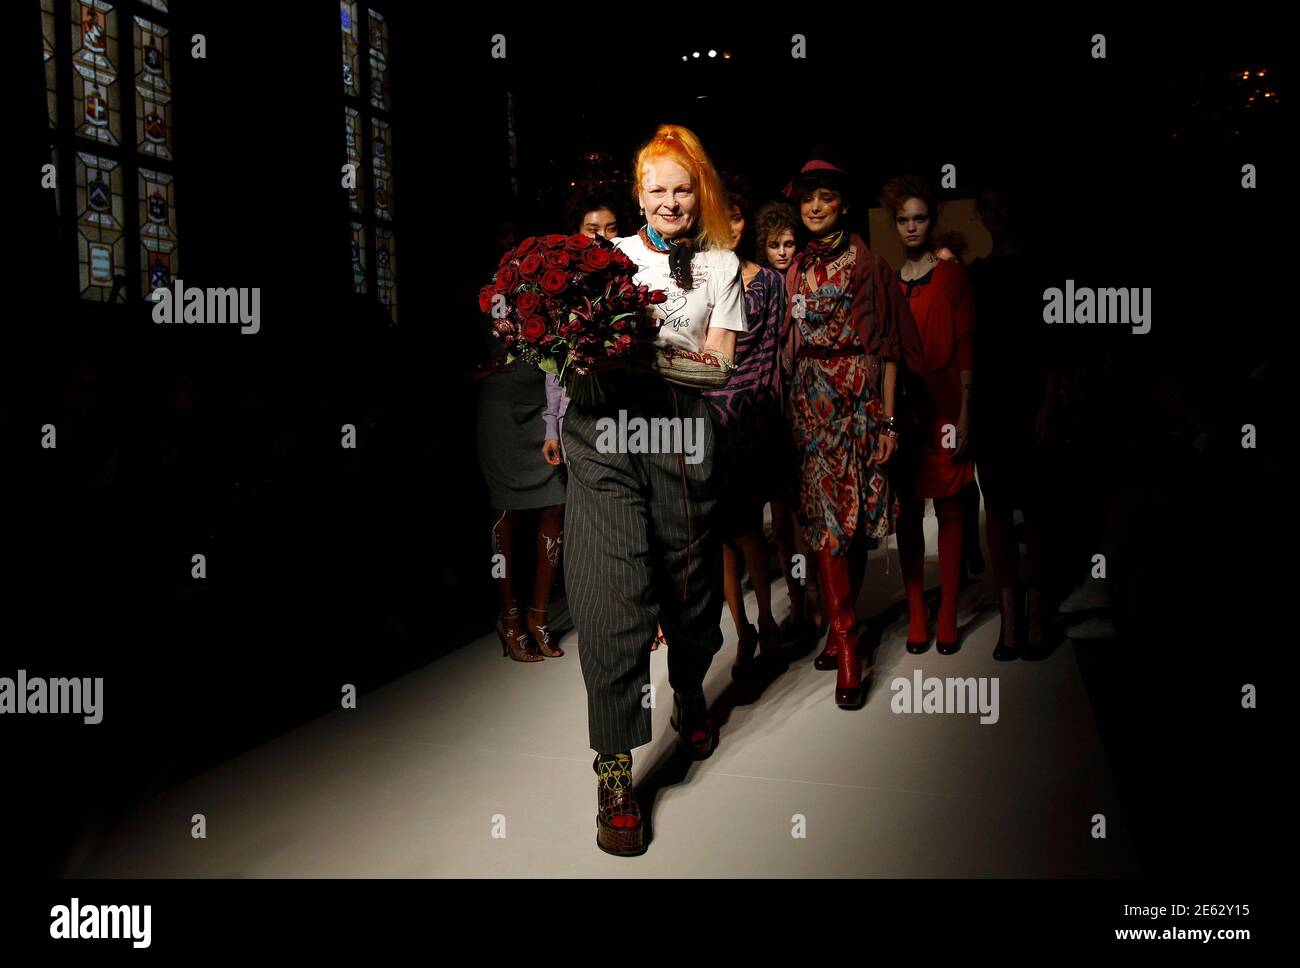 Designer Vivienne Westwood walks on the catwalk with her models after the presentation of her Vivienne Westwood Red Label 2012 Autumn/Winter collection during London Fashion Week February 19, 2012. REUTERS/Suzanne Plunkett (BRITAIN - Tags: FASHION) Foto Stock